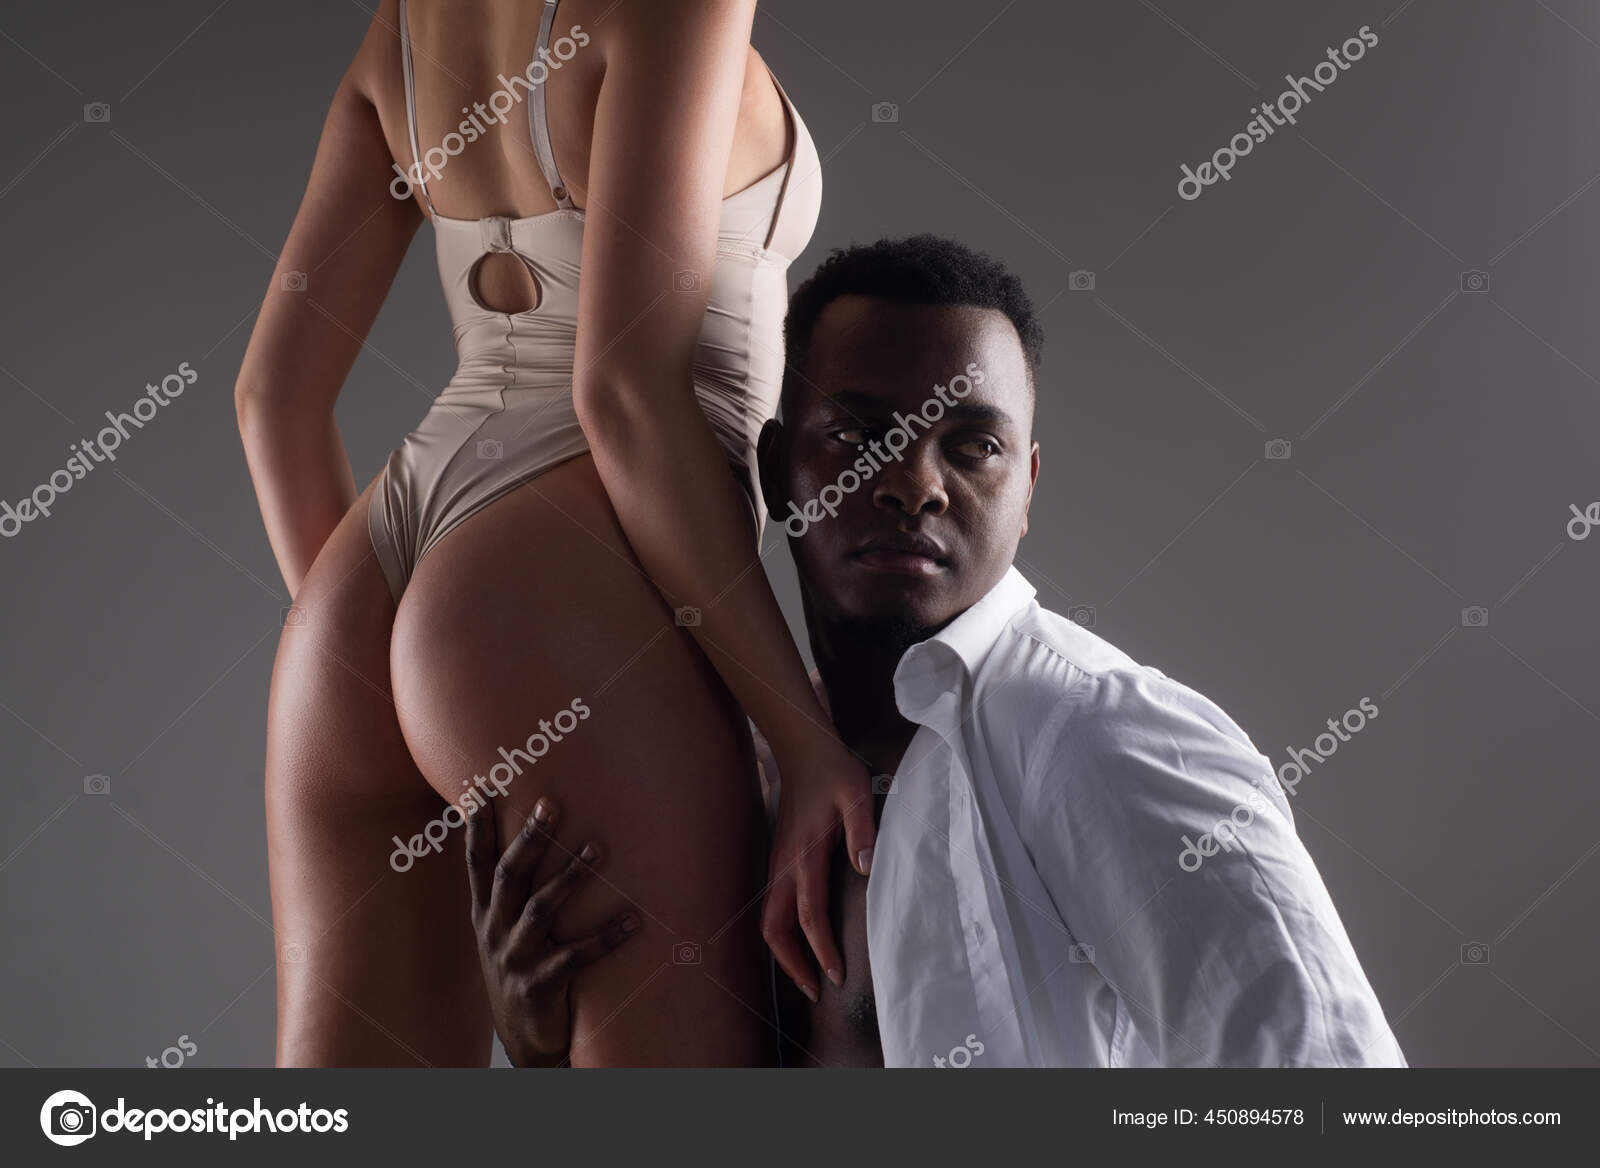 Multiethnic couple. Interracial sex. Passionately embracing. Sexy love. Erotic and desire. Couple relationships photo